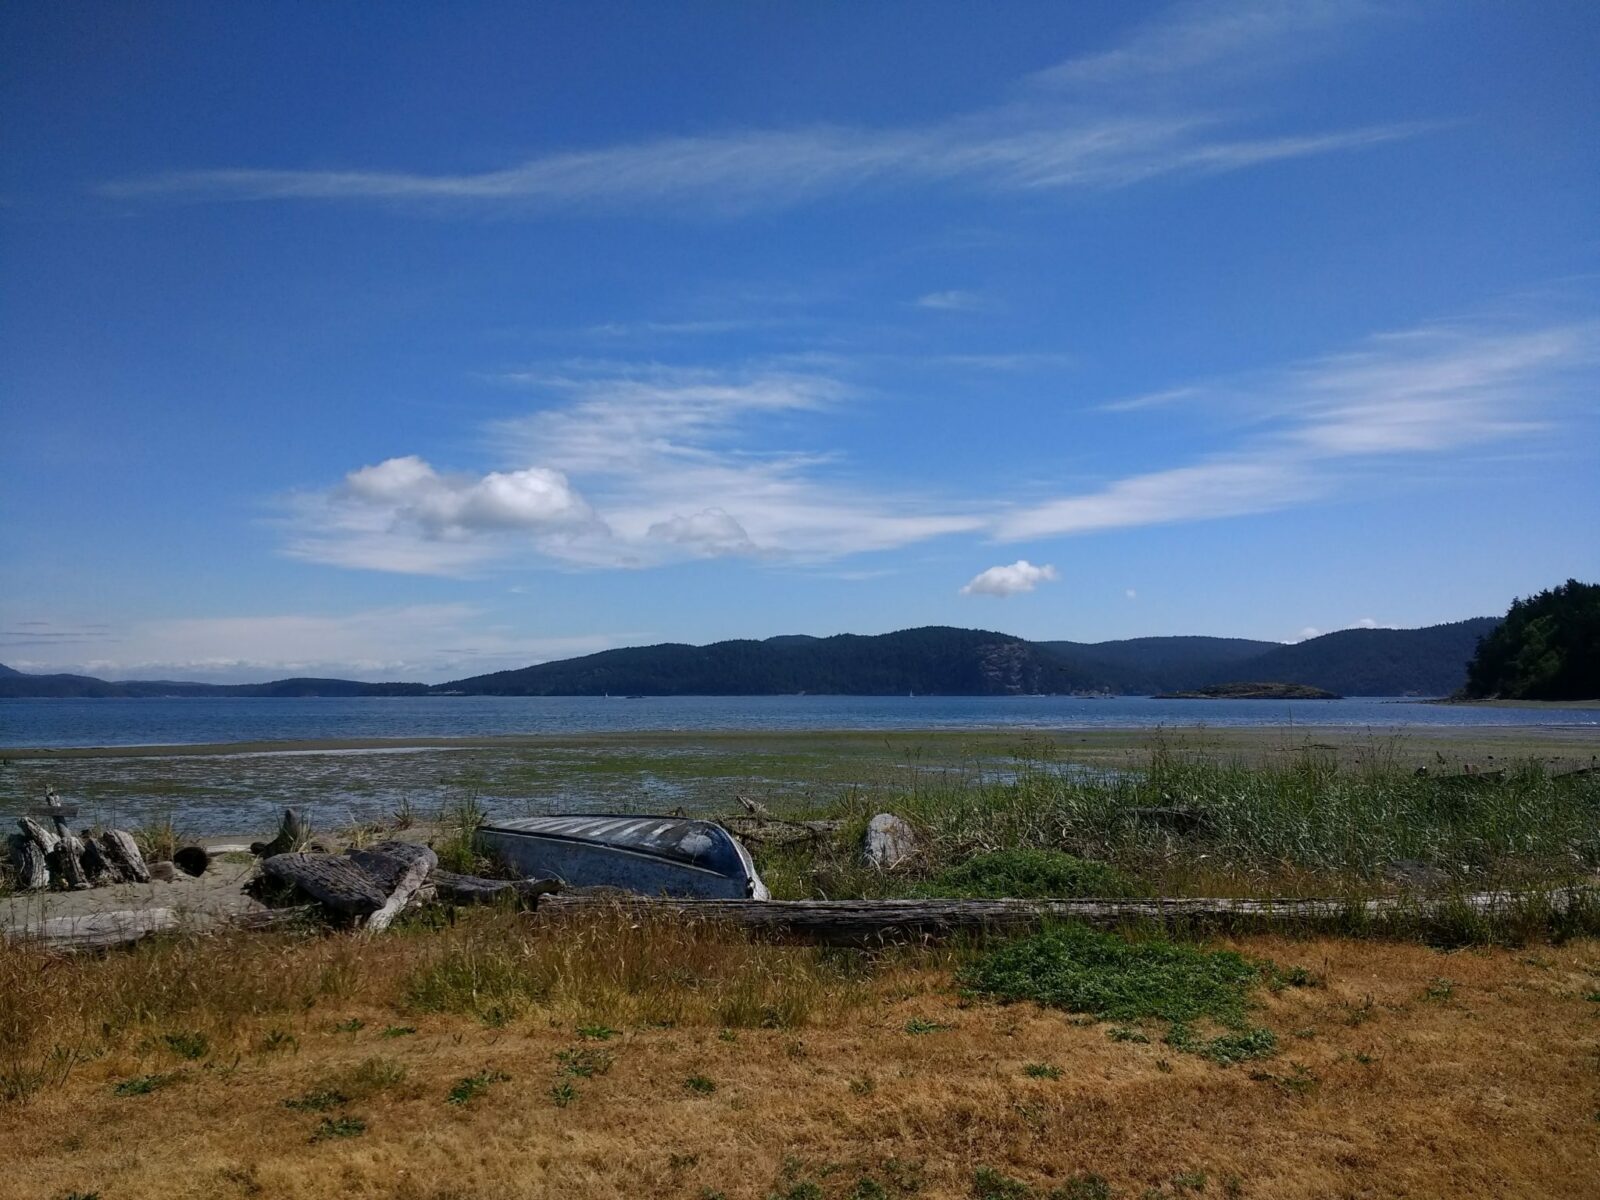 Camping in the San Juan Islands at Spencer Spit State Park. There is a grassy spit in the foreground wtih a canoe, tideflats and water behind. Forested islands are in the background on a sunny day